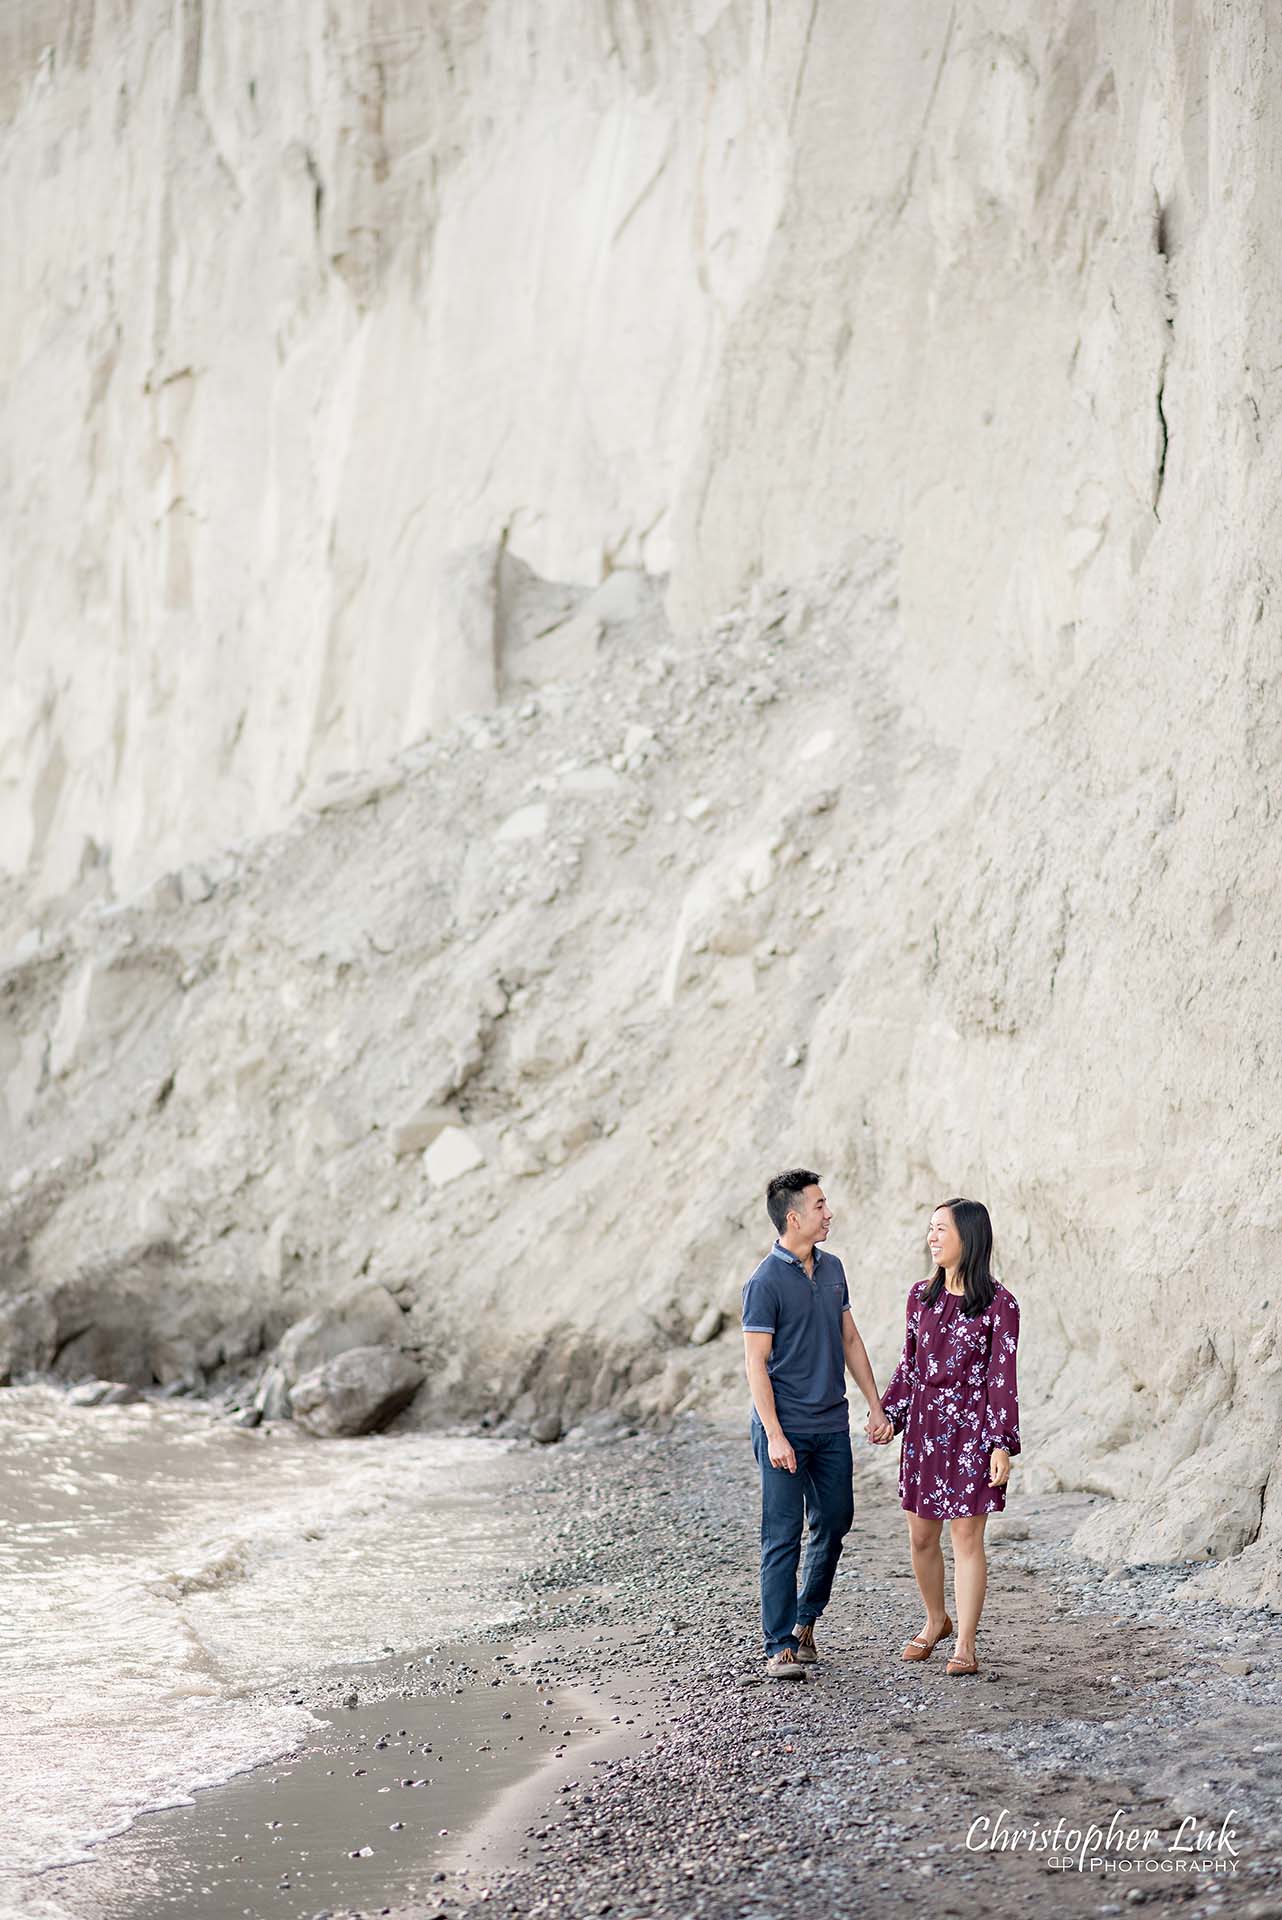 Christopher Luk Toronto Photographer Scarborough Bluffs Beach Park Sunset Surprise Wedding Marriage Engagement Proposal Candid Natural Photojournalistic Bride Groom Waterfront Water Lake Ontario Background Beachfront Sand Walking Together Holding Hands Edge of Water Smile Stone Portrait